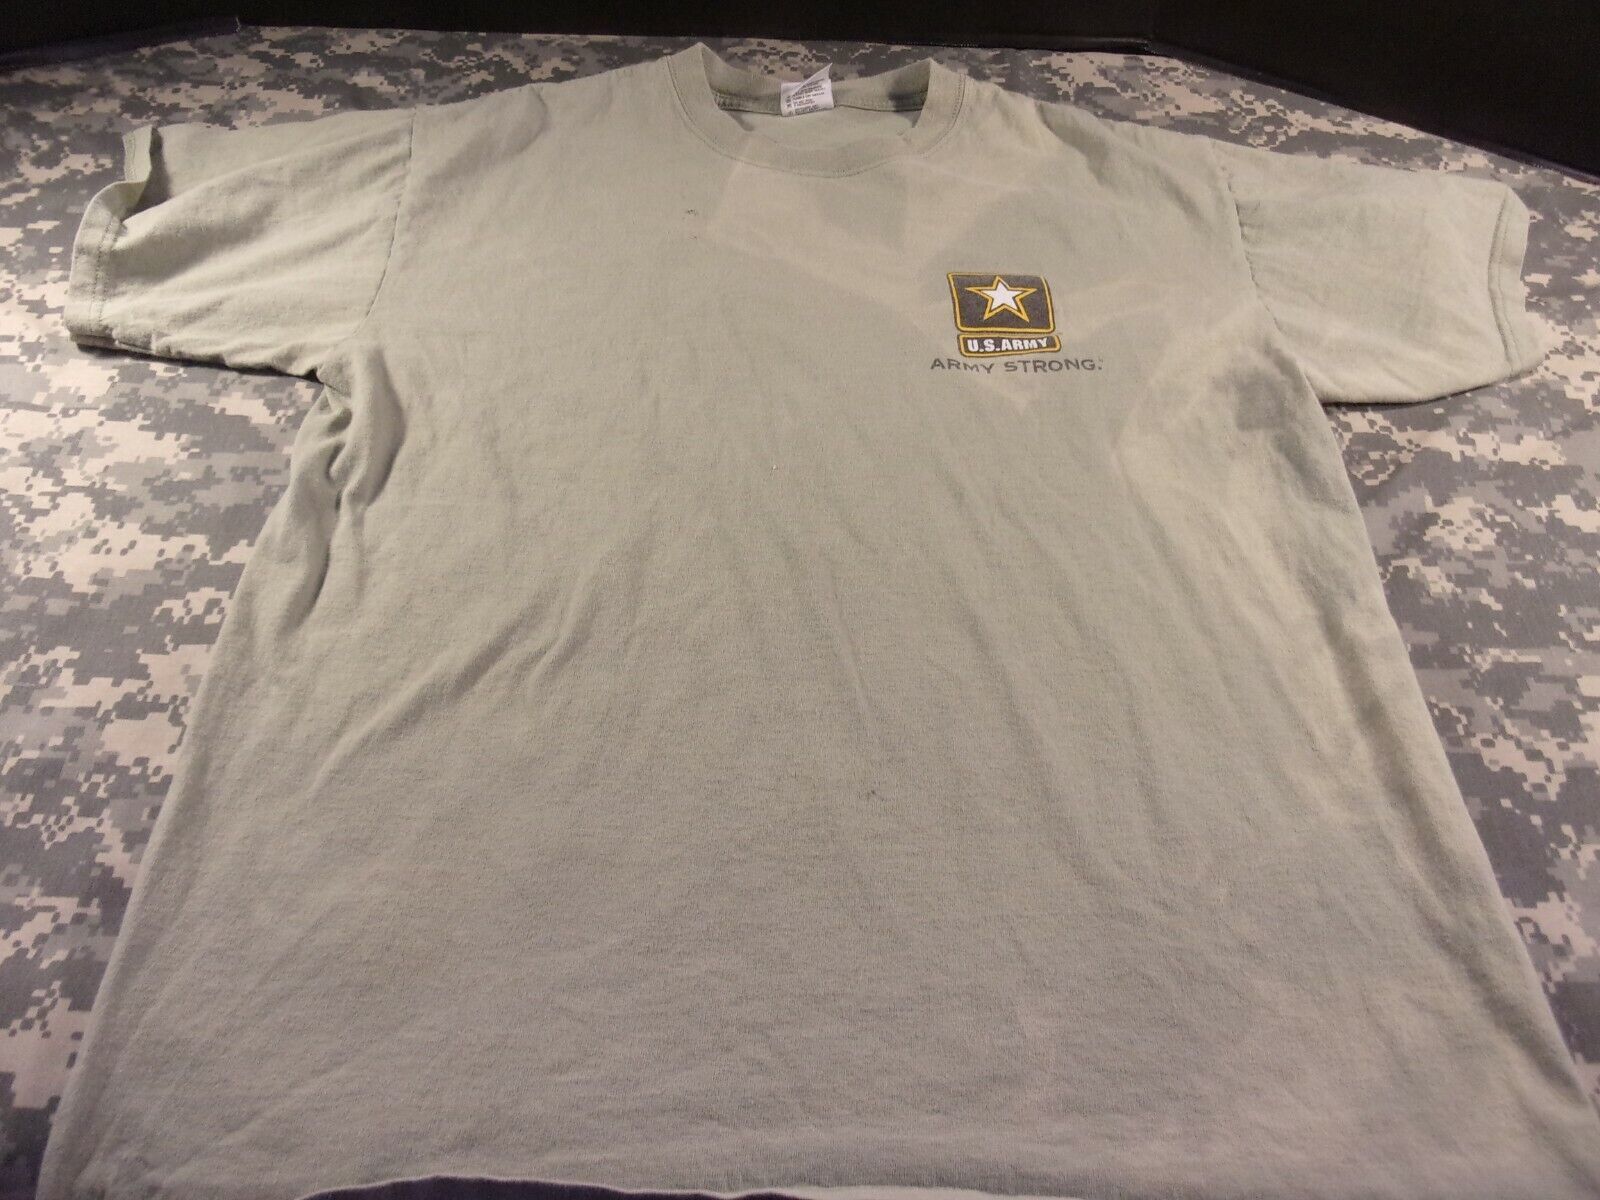 Primary image for 2006 U.S. ARMY STRONG T-SHIRT "STAND STRONG, STAND TALL, STAND OUT" TAN LARGE